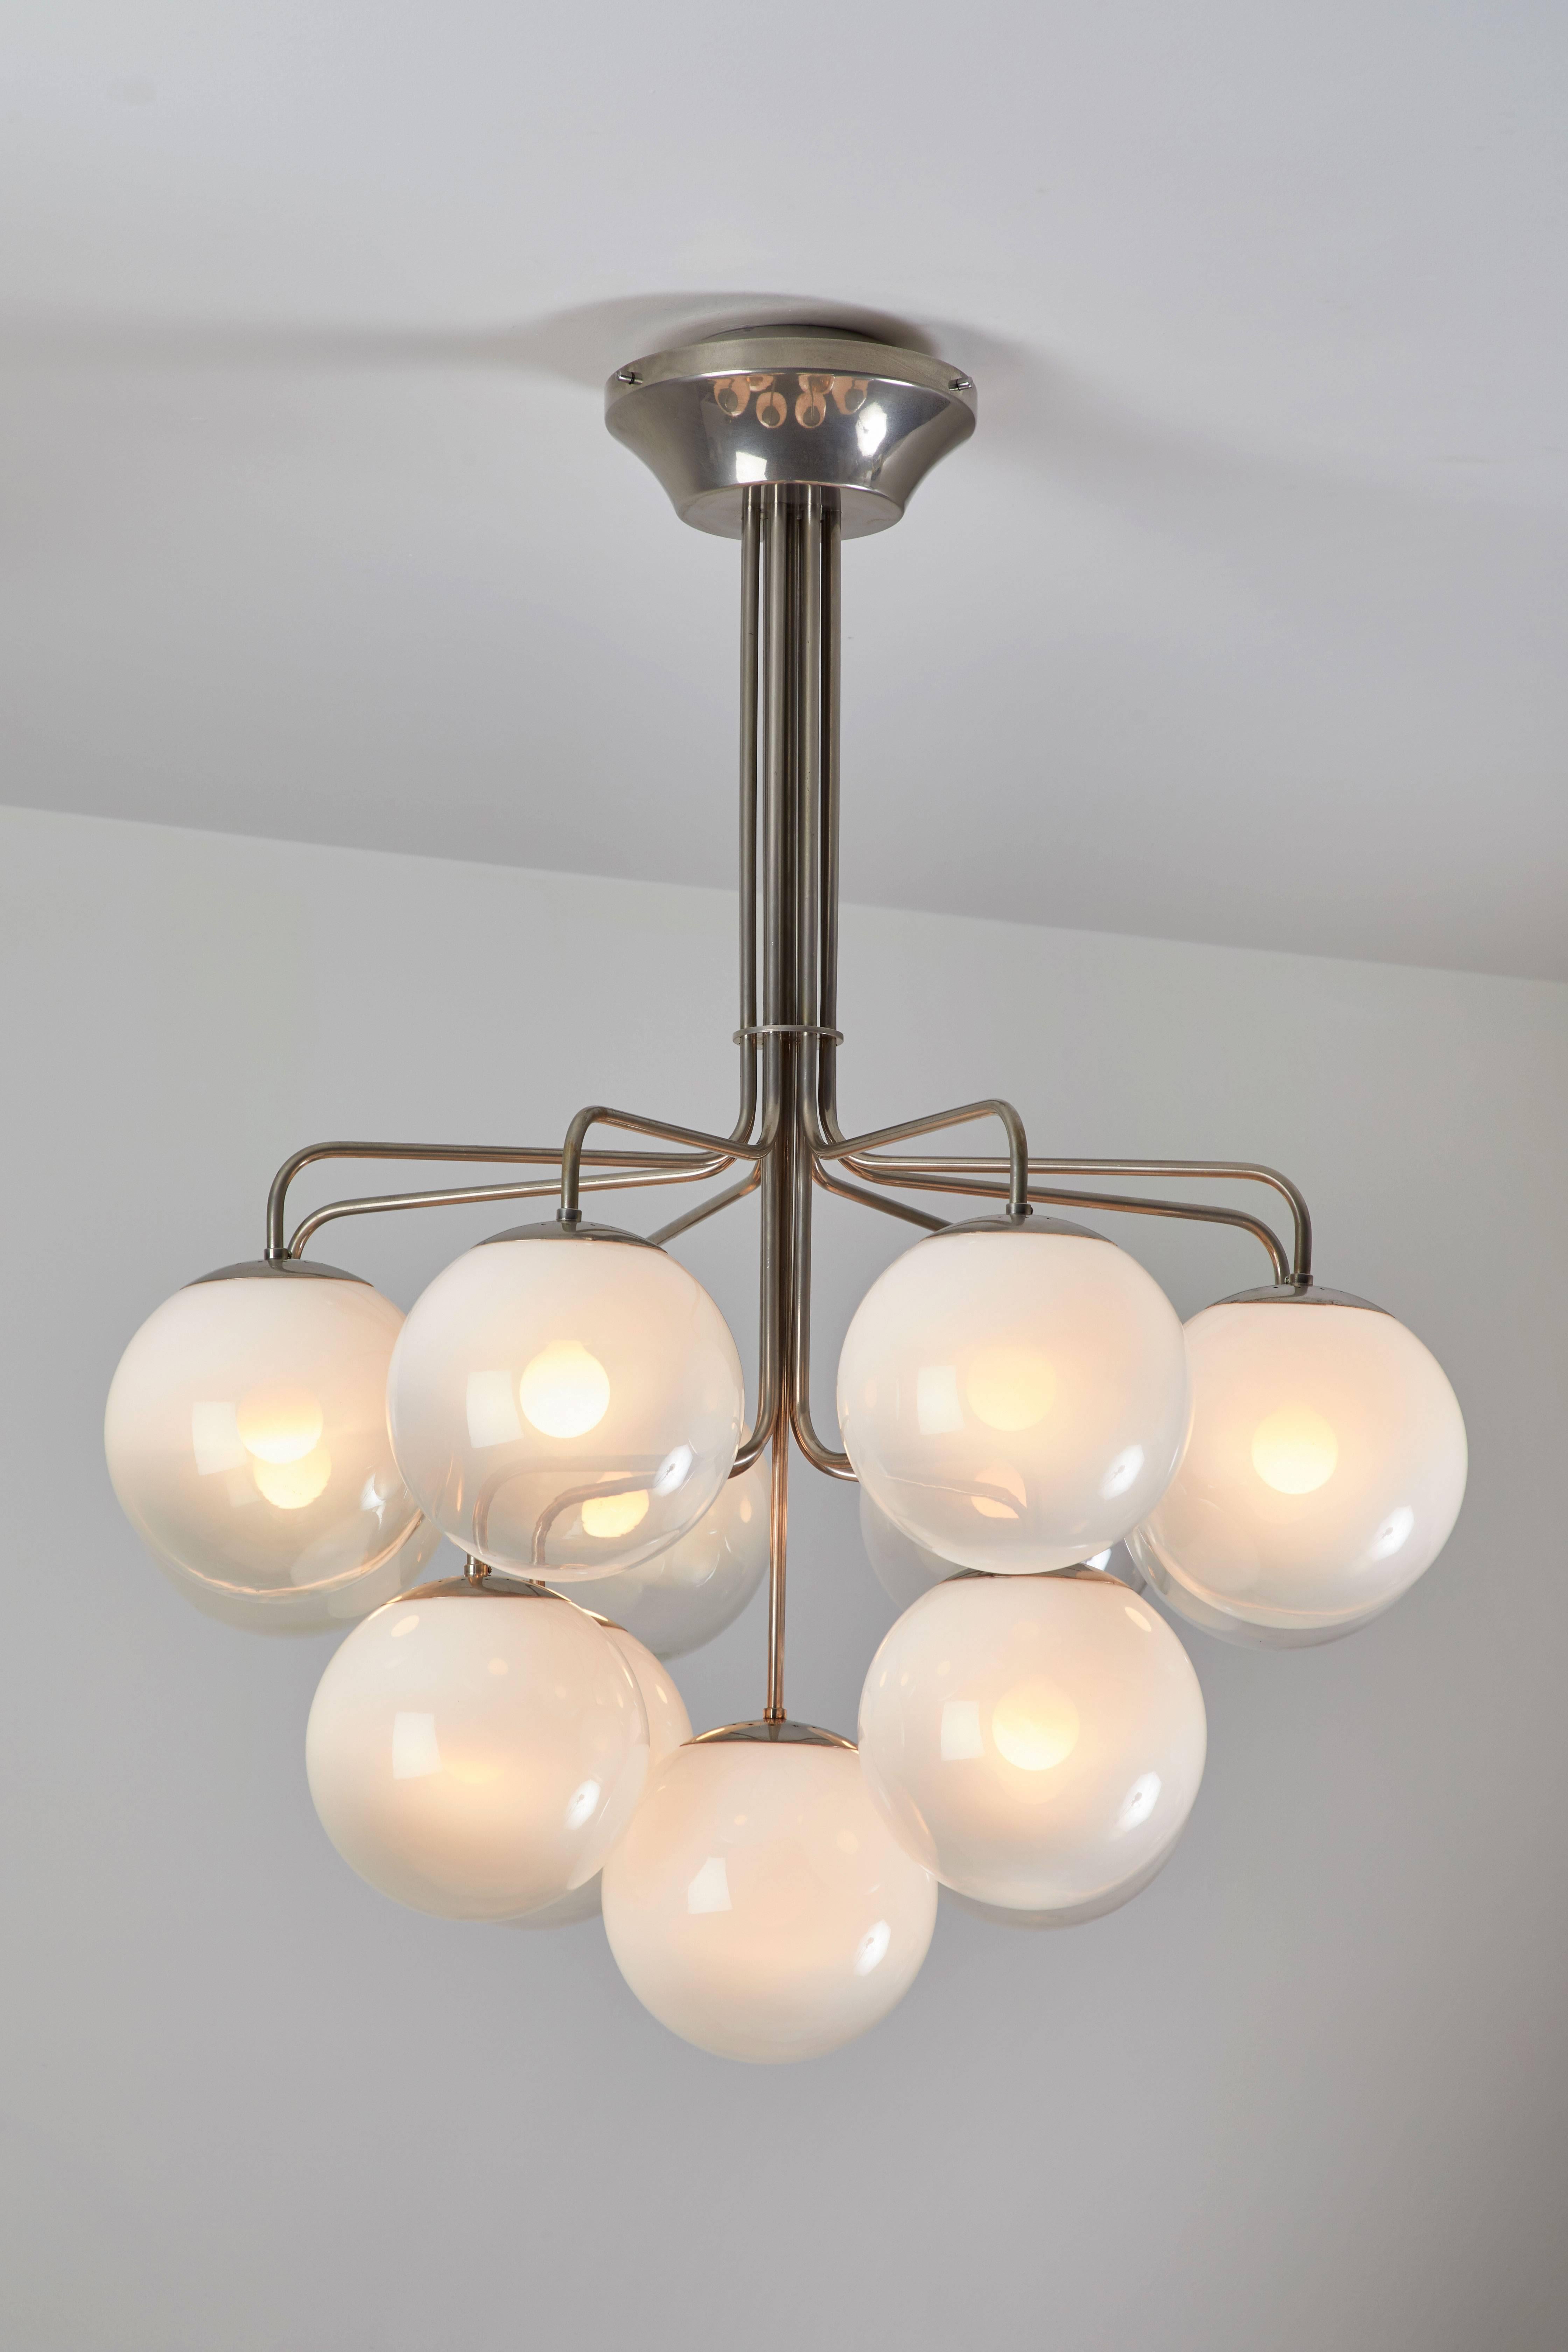 Thirteen globe chandelier by Vico Magistretti designed in Italy, circa 1960s. Nickel-plated brass and aluminium. Handblown Murano glass globes. Wired for US junction boxes. Each globe takes one E14 25w maximum bulb.